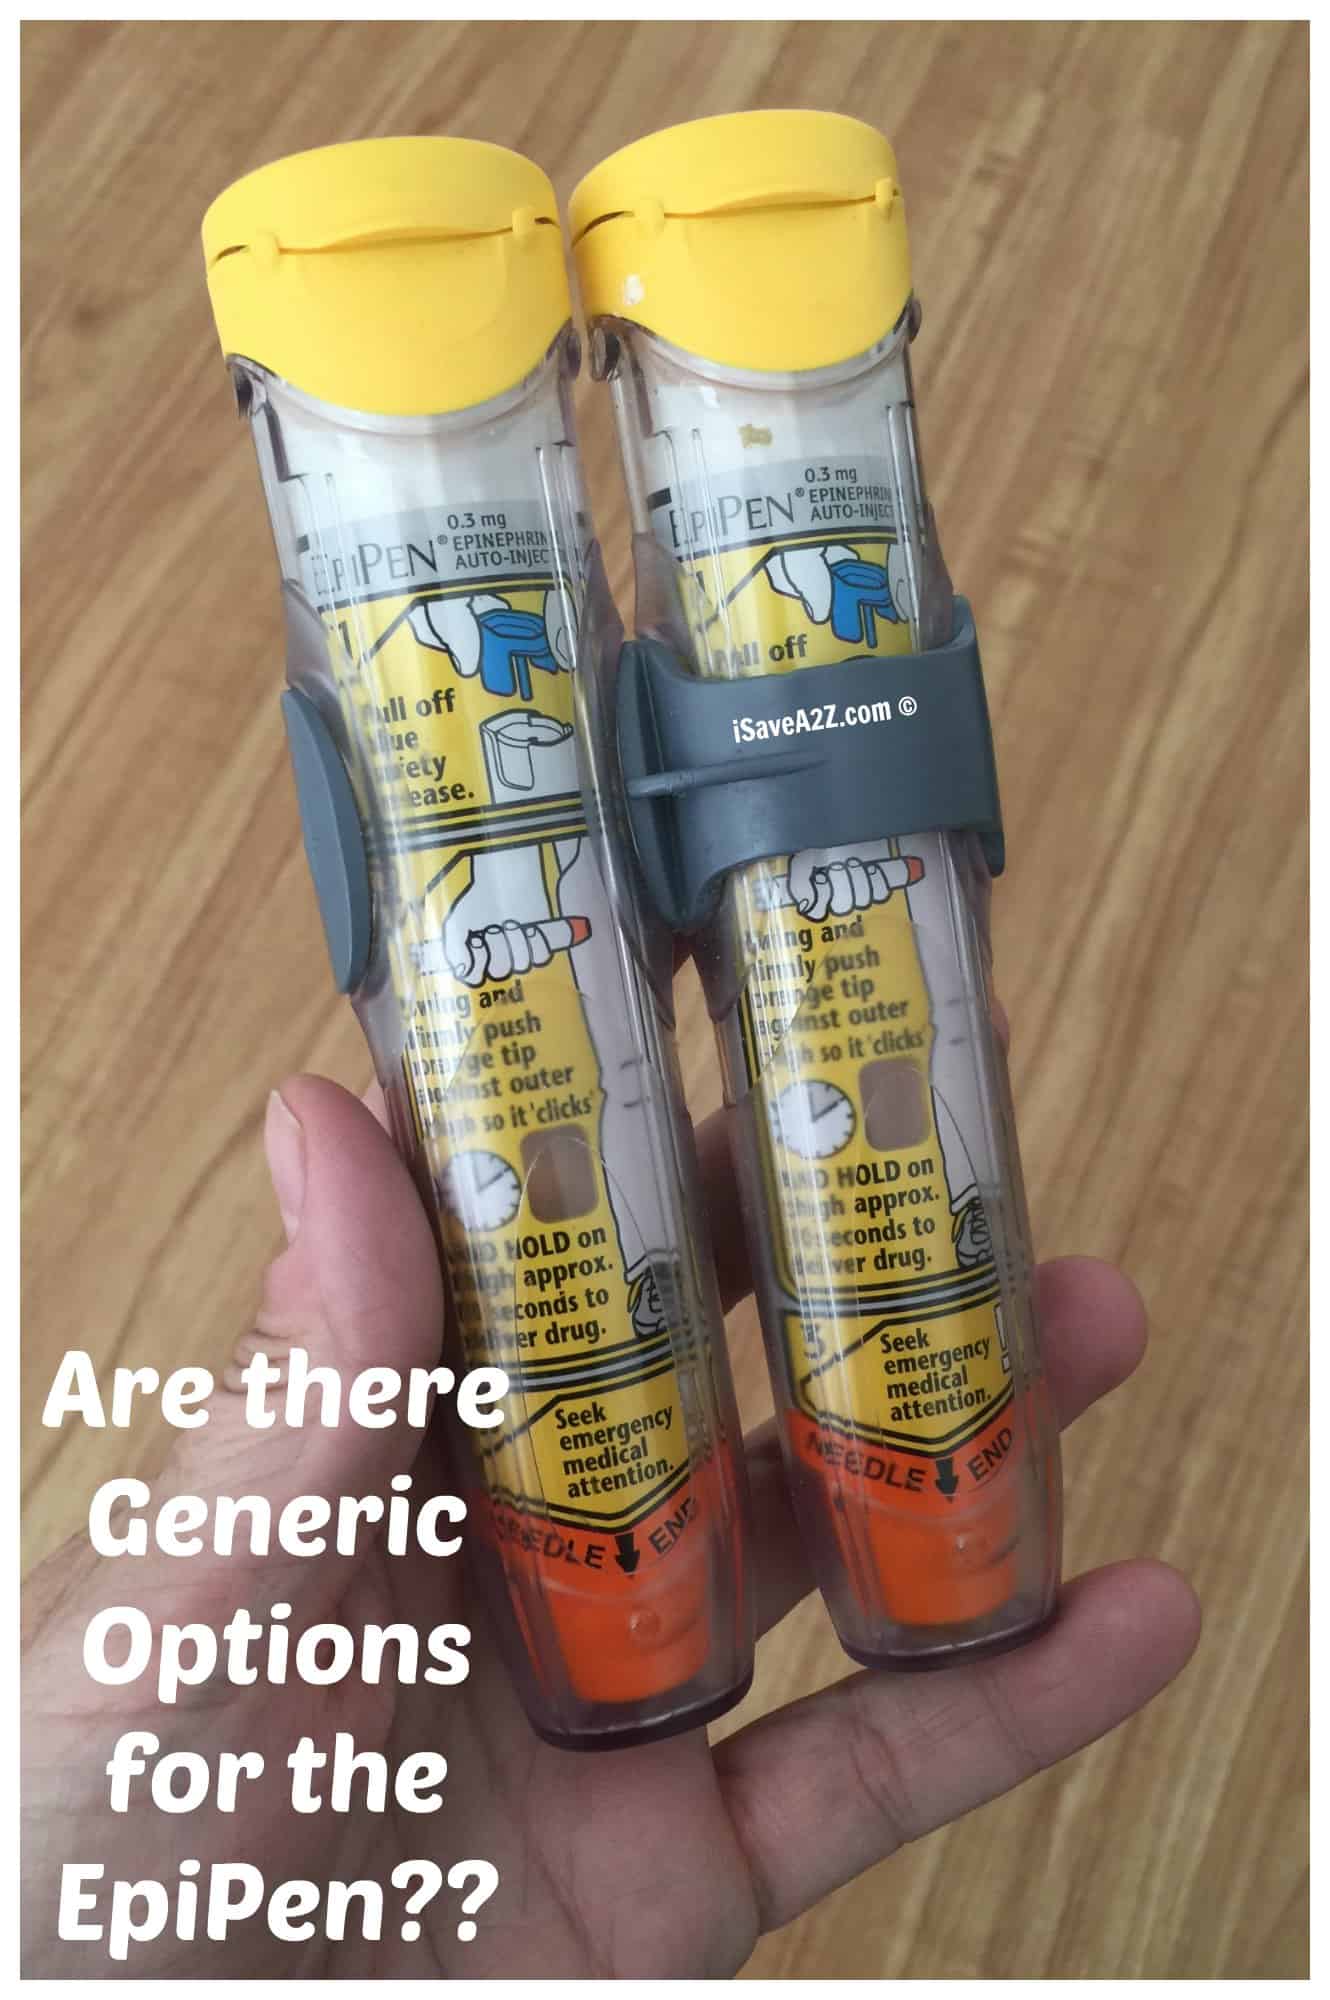 Generic Options for the EpiPen